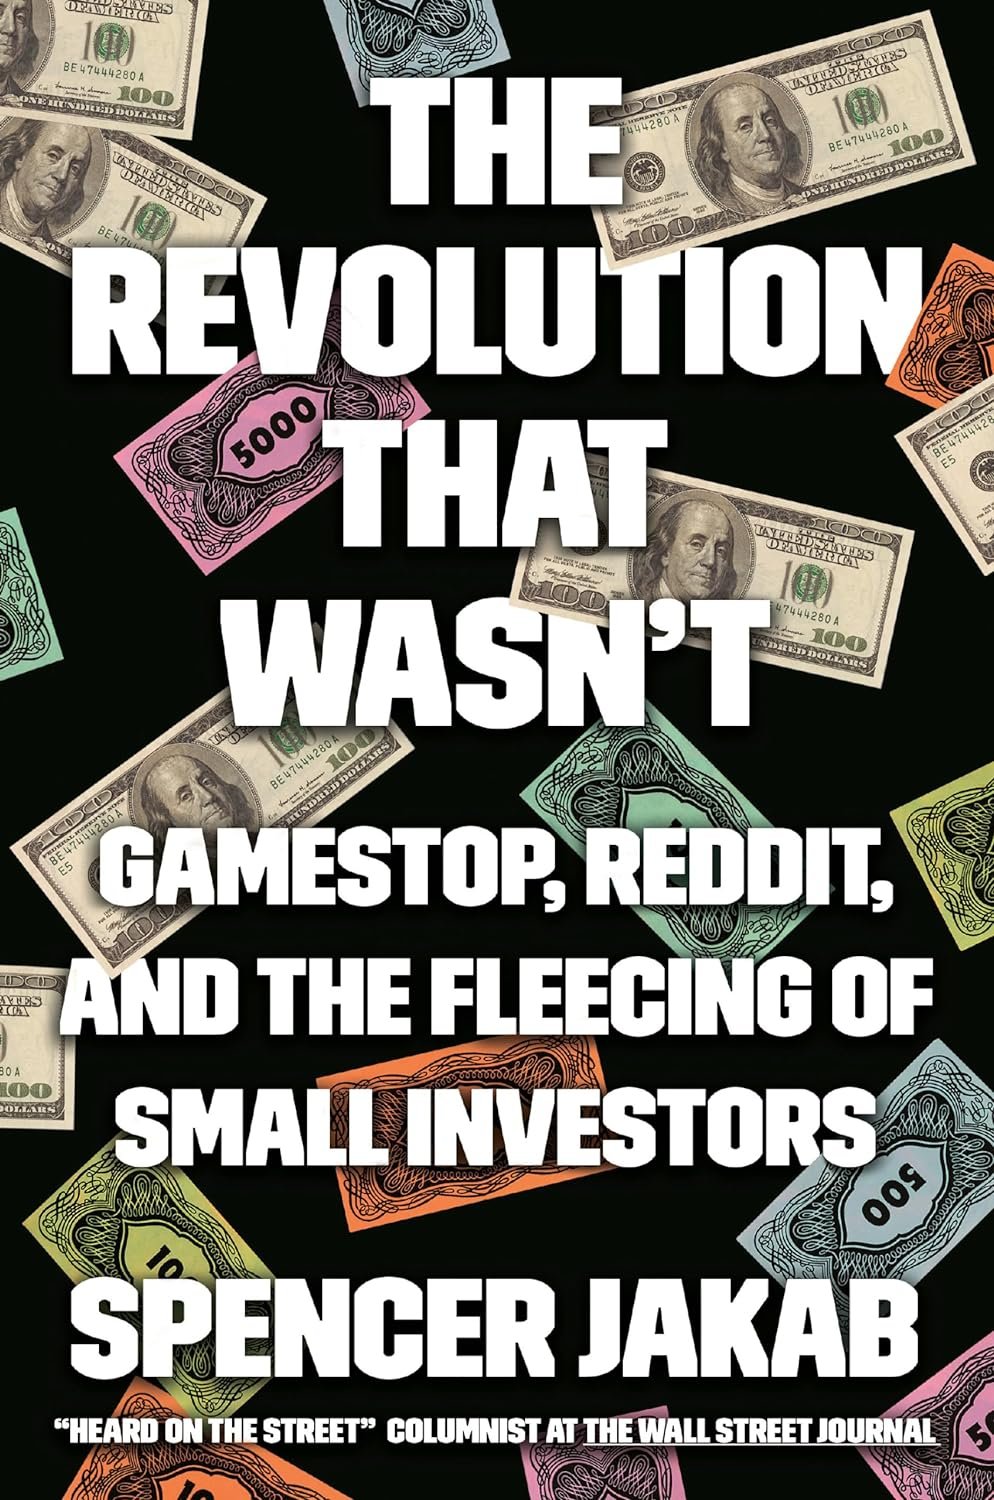 The Revolution That Wasn't: GameStop, Reddit, and the Fleecing of Small Investors